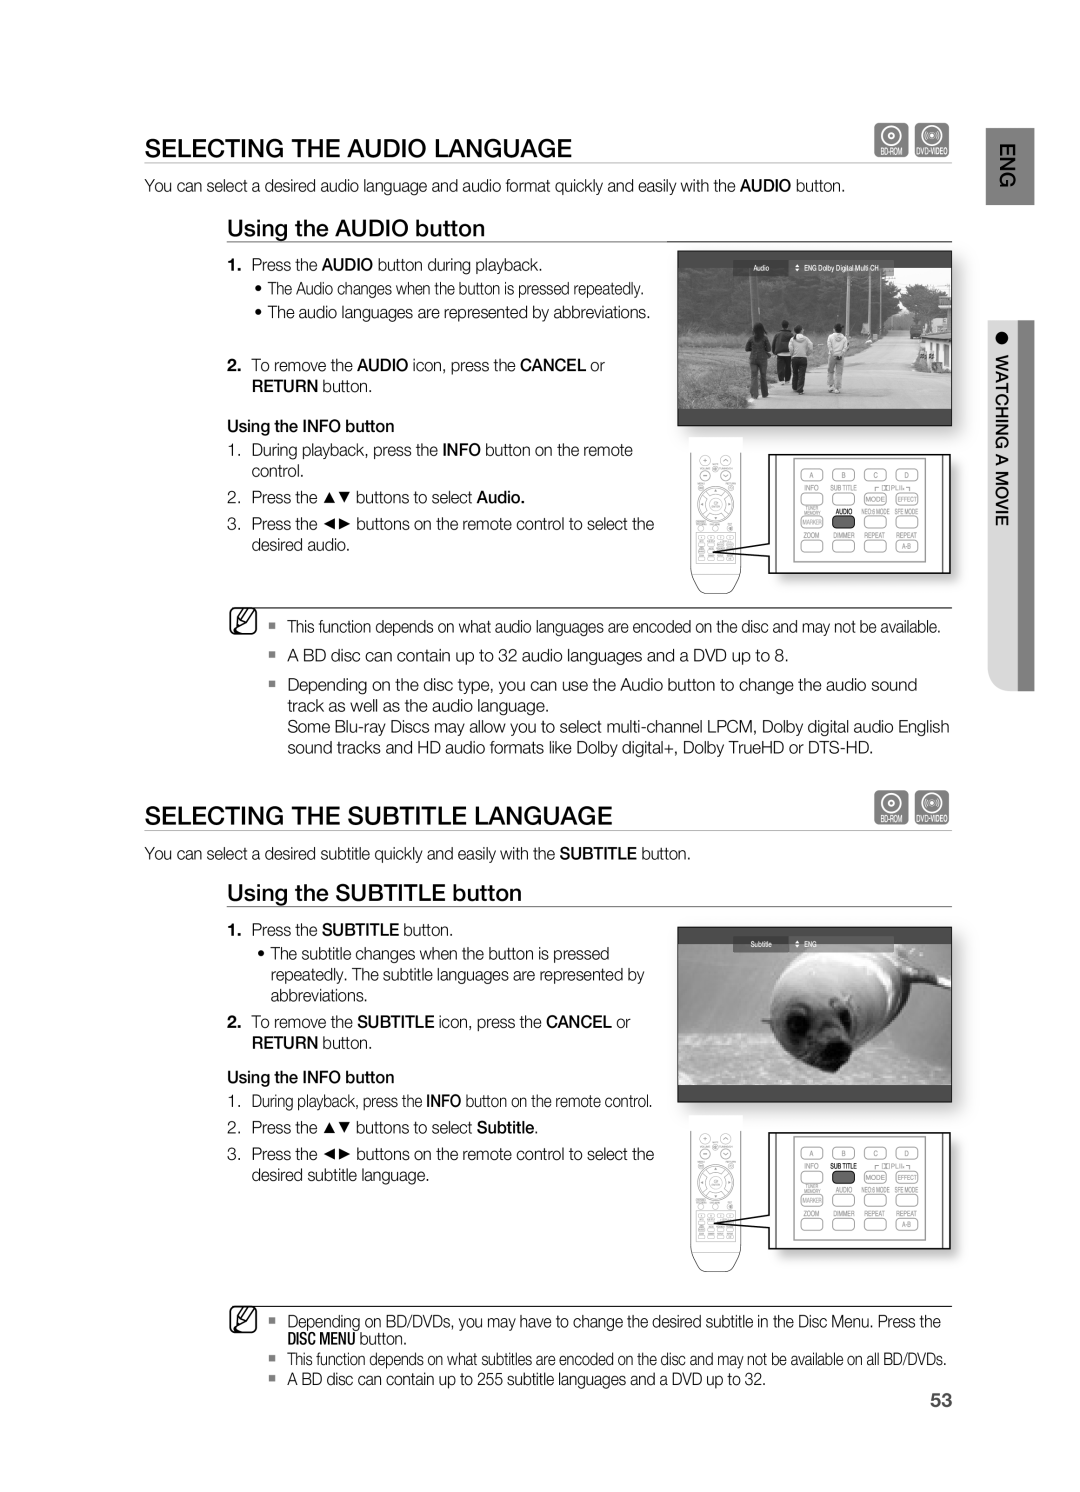 Samsung HT-BD2 manual Selecting The Audio Language, Selecting The Subtitle Language, Using the AUDIO button 